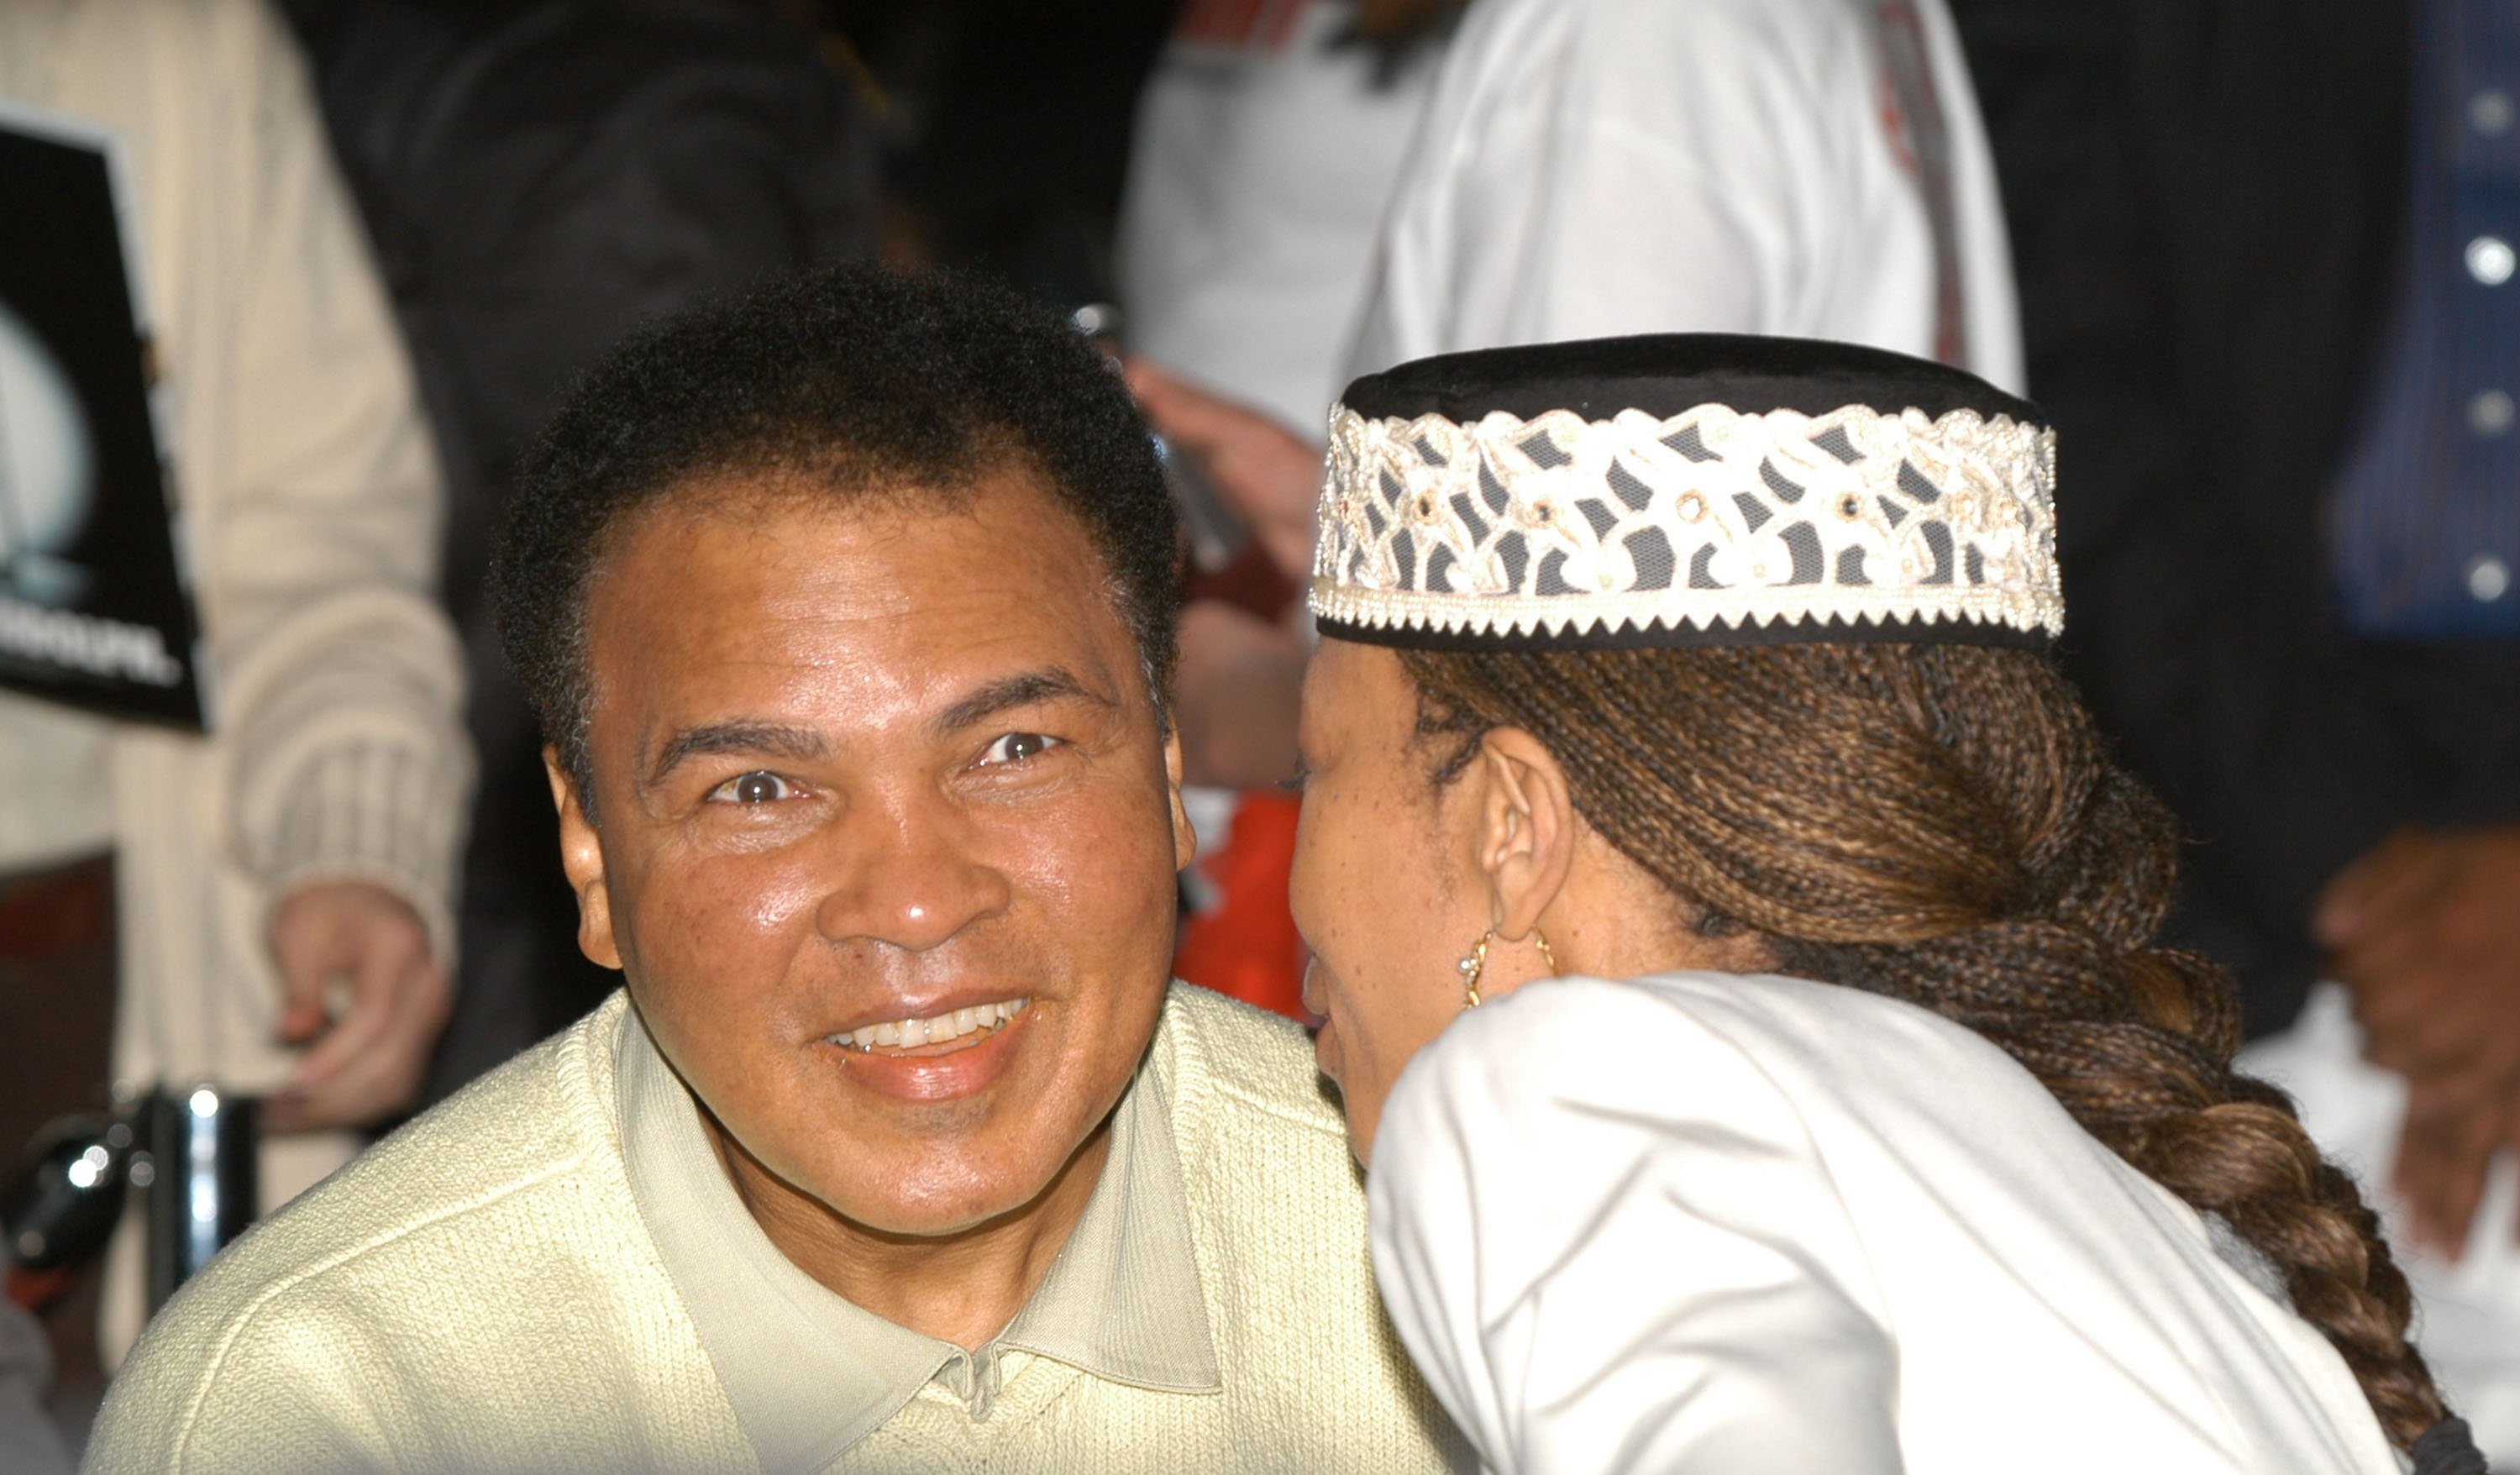 Malcolm X's daughter, Attallah, speaks with Muhammad Ali as they attend the Miami Art Basel Taschen book premiere of Muhammad Ali's book, "GOAT - Greatest Of All Time" at the Miami Convention Center December 6, 2003 in Miami, Florida.| Source: Getty Images